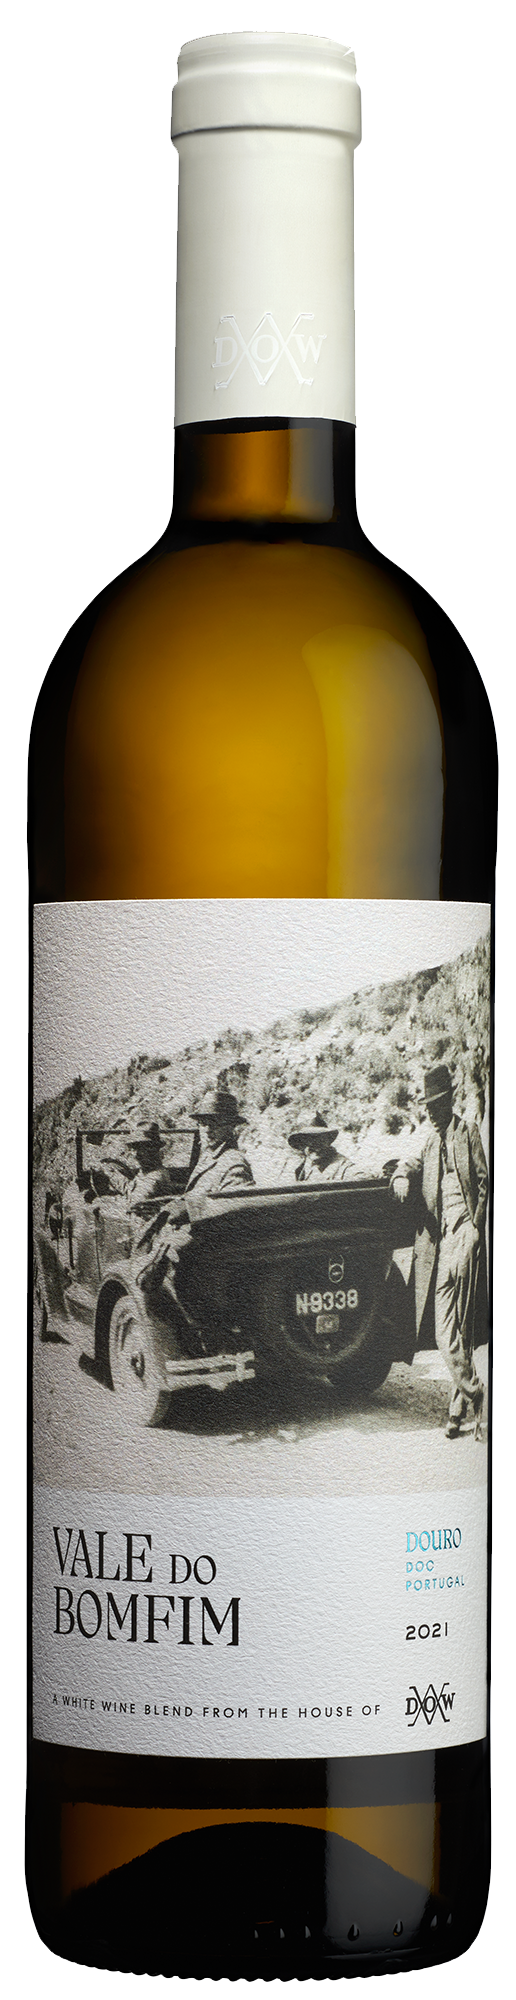 Product Image for DOW'S VALE DO BOMFIM DOURO WHITE 2021